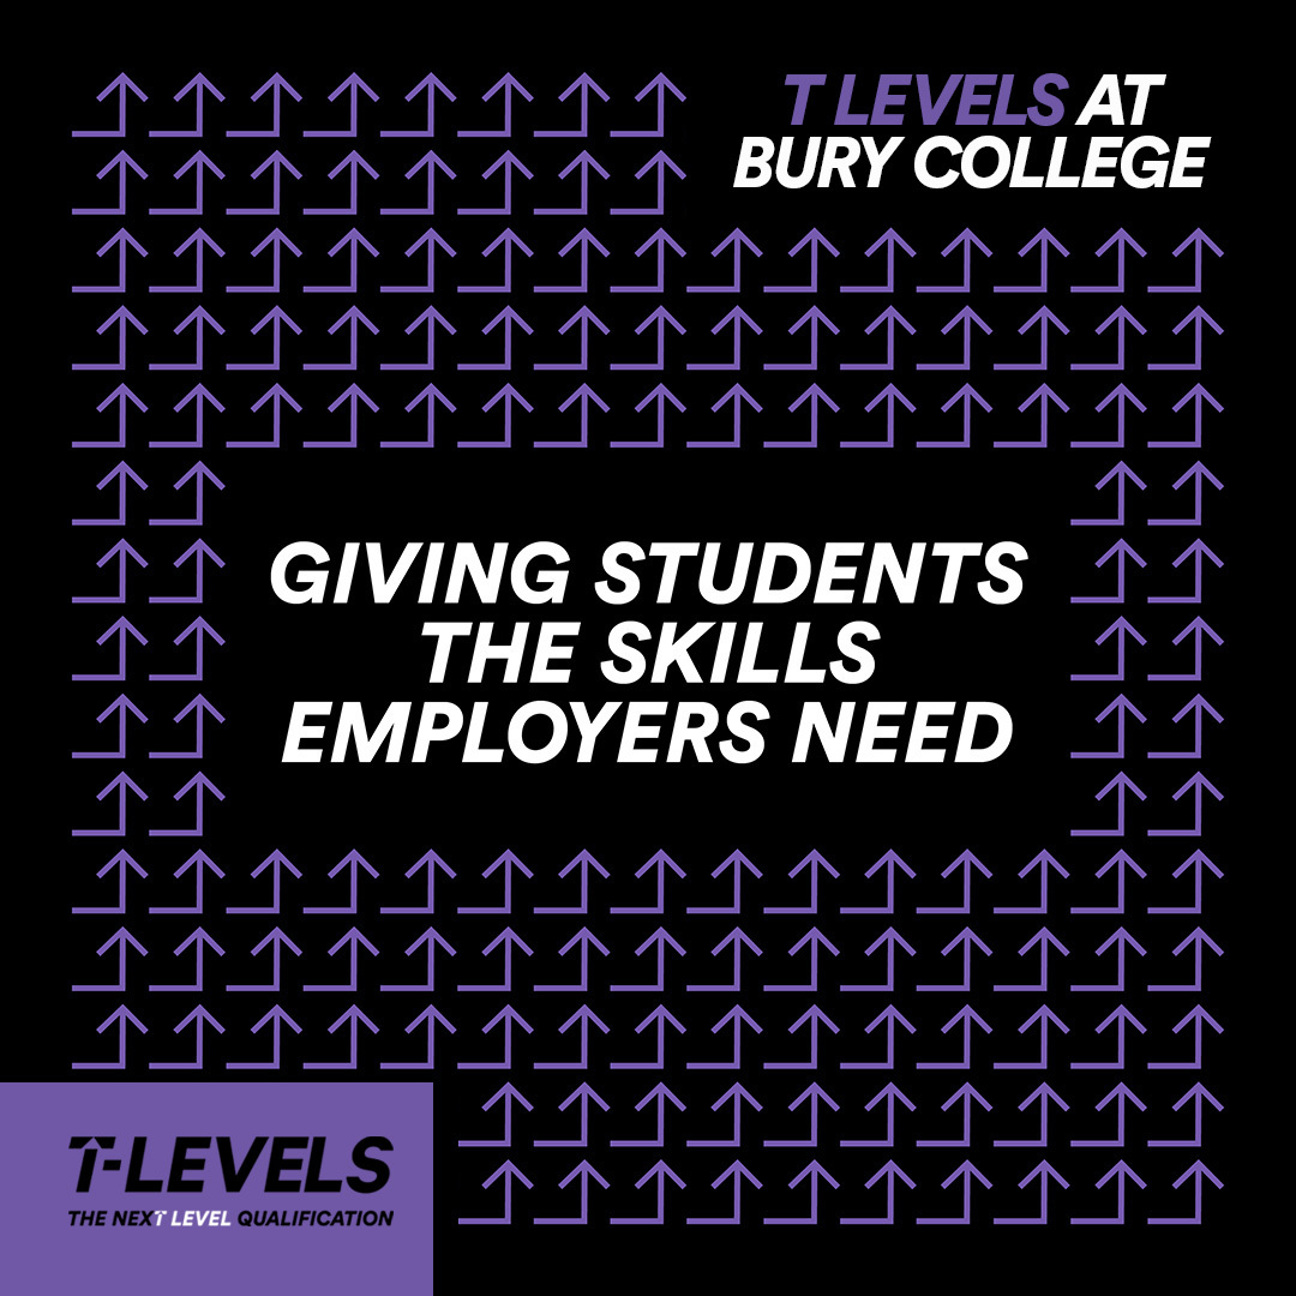 Giving students the skills employers need